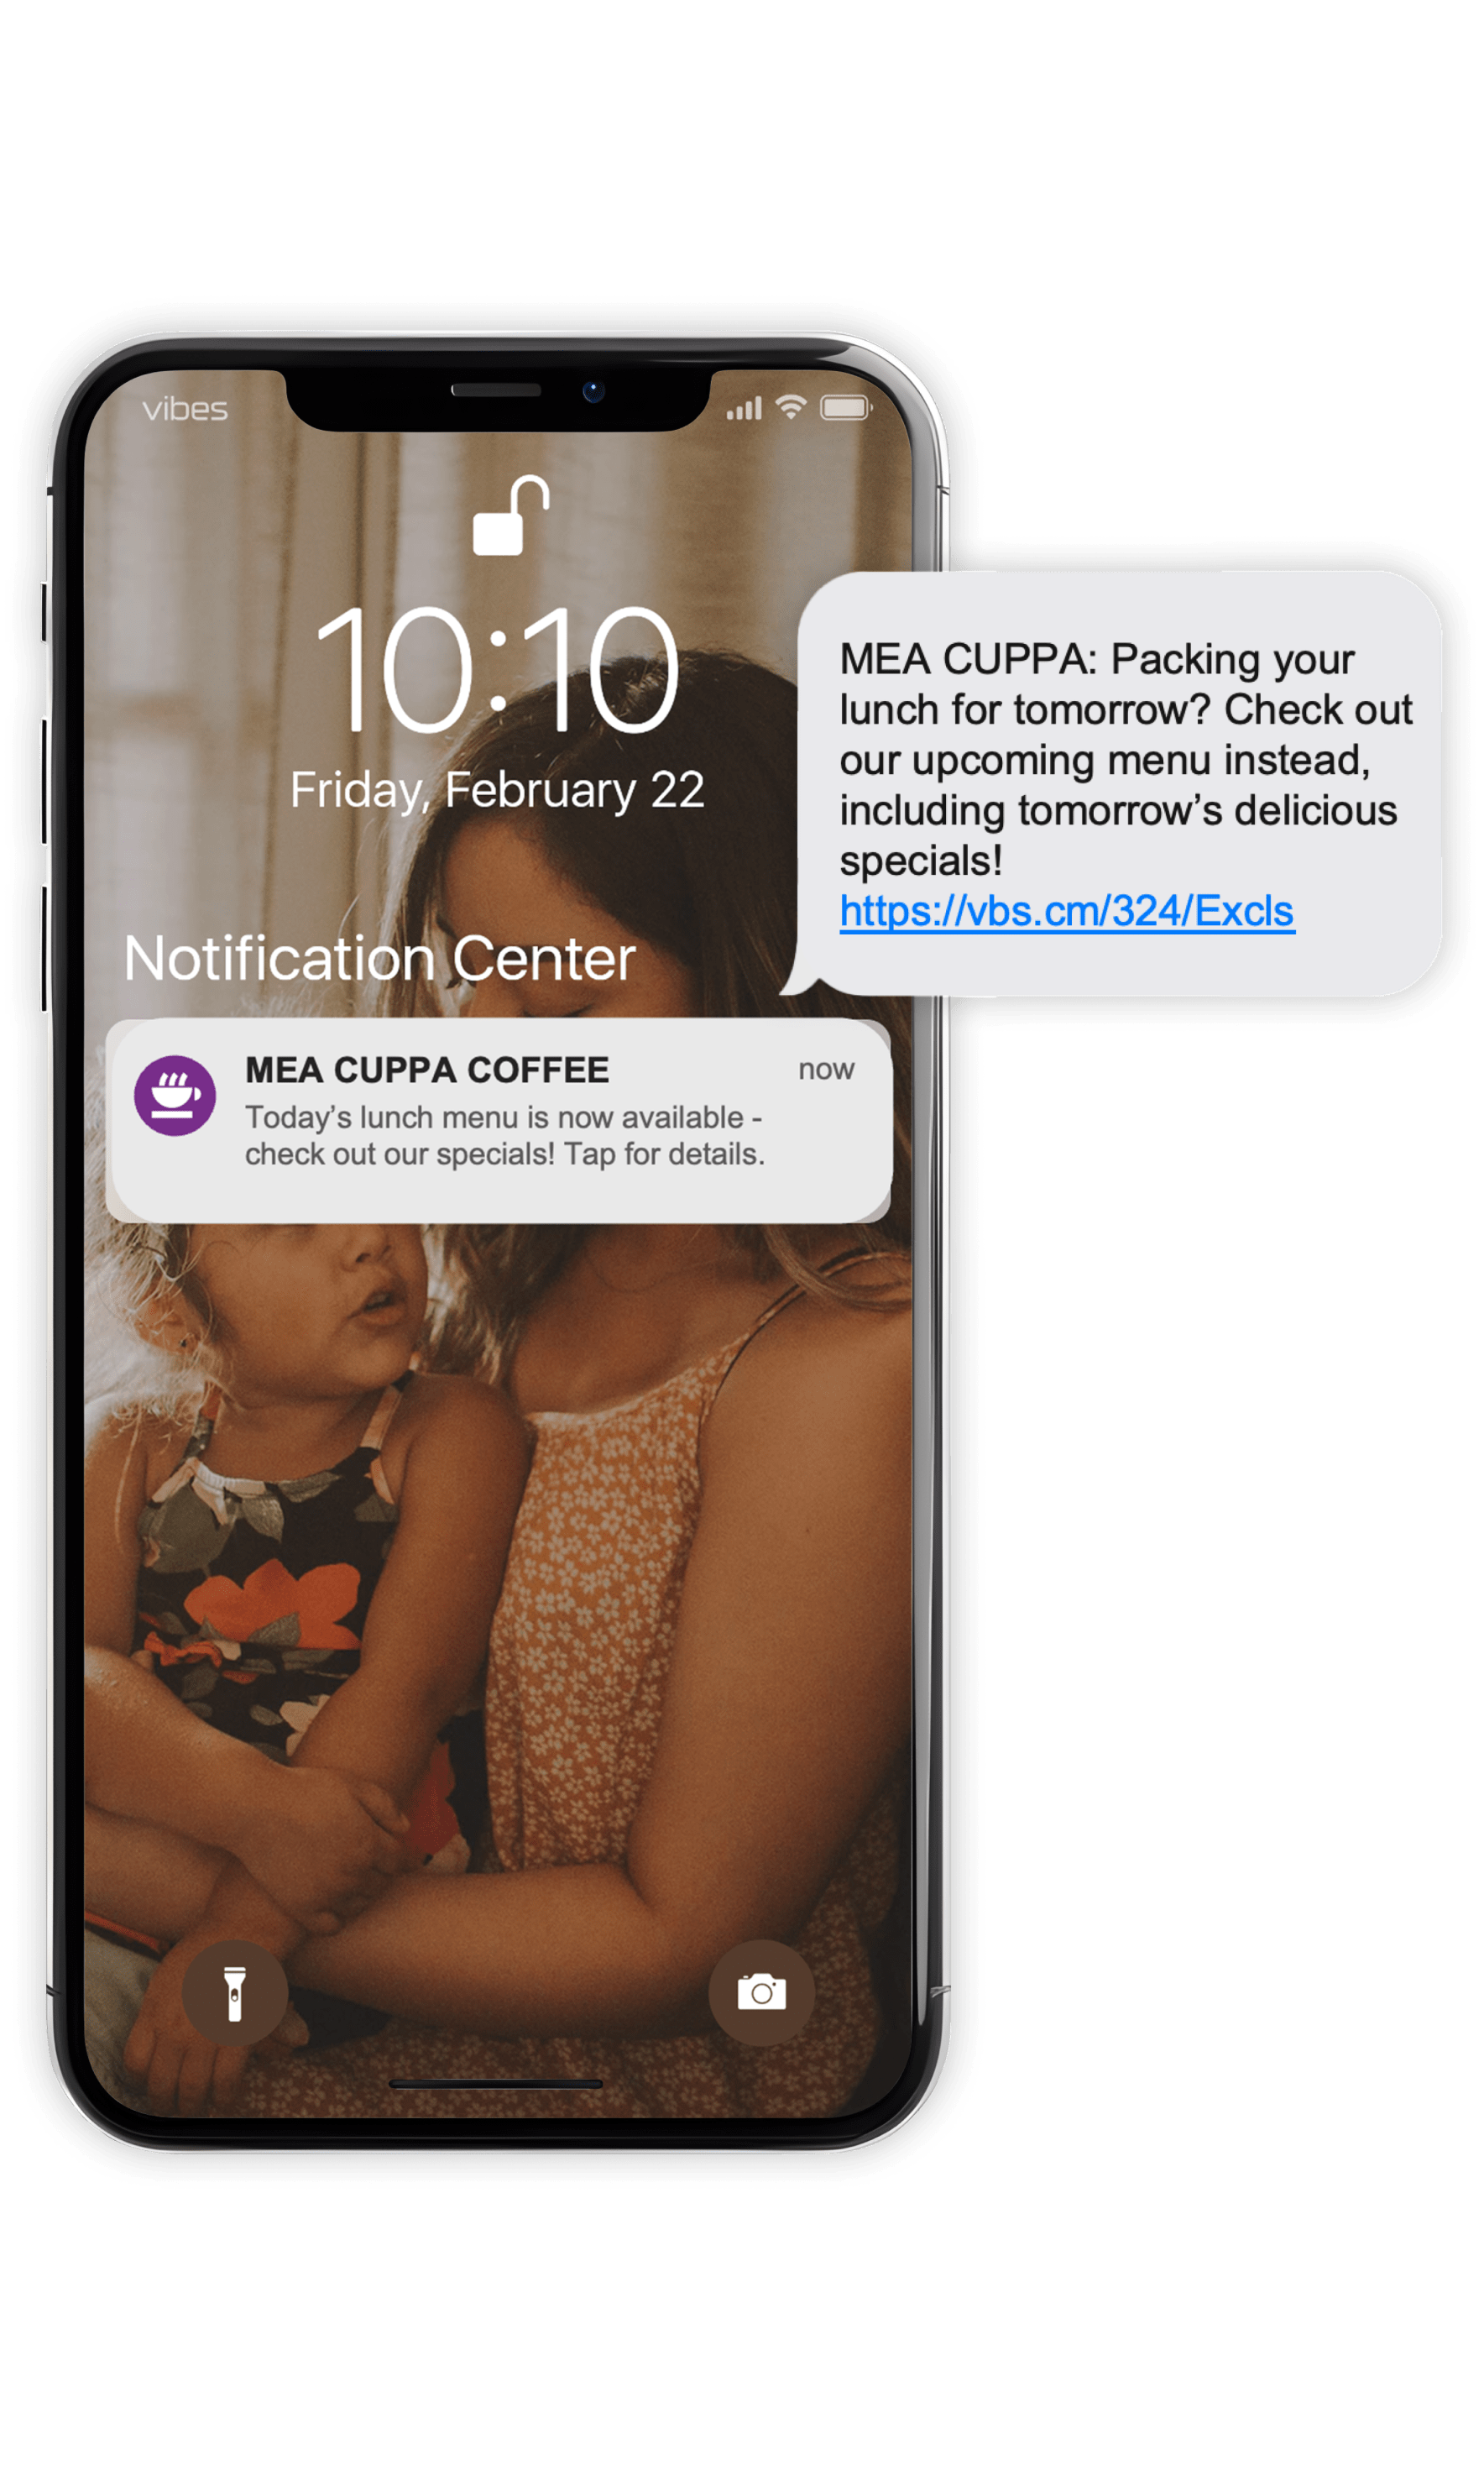 Push notification and SMS message orchestration for lunch alerts